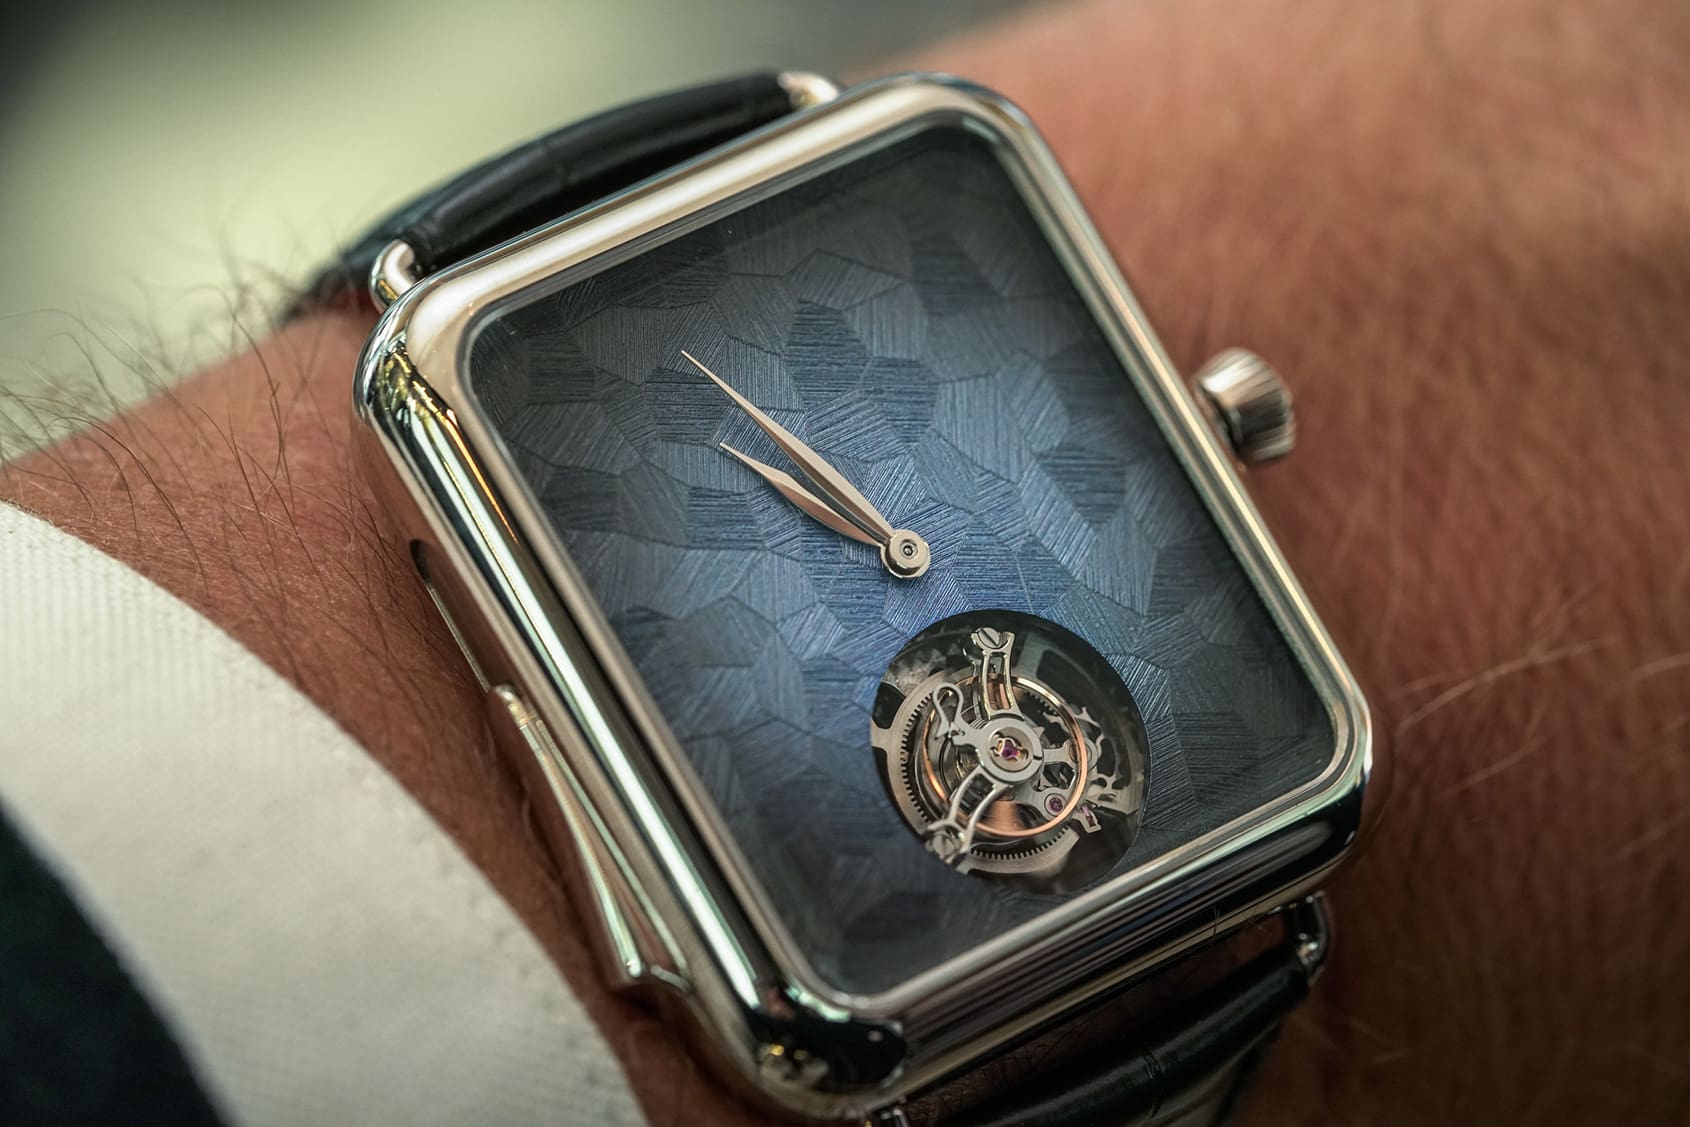 VIDEO: H. Moser & Cie’s 2018 collection brings the heat and of course those smoky dials